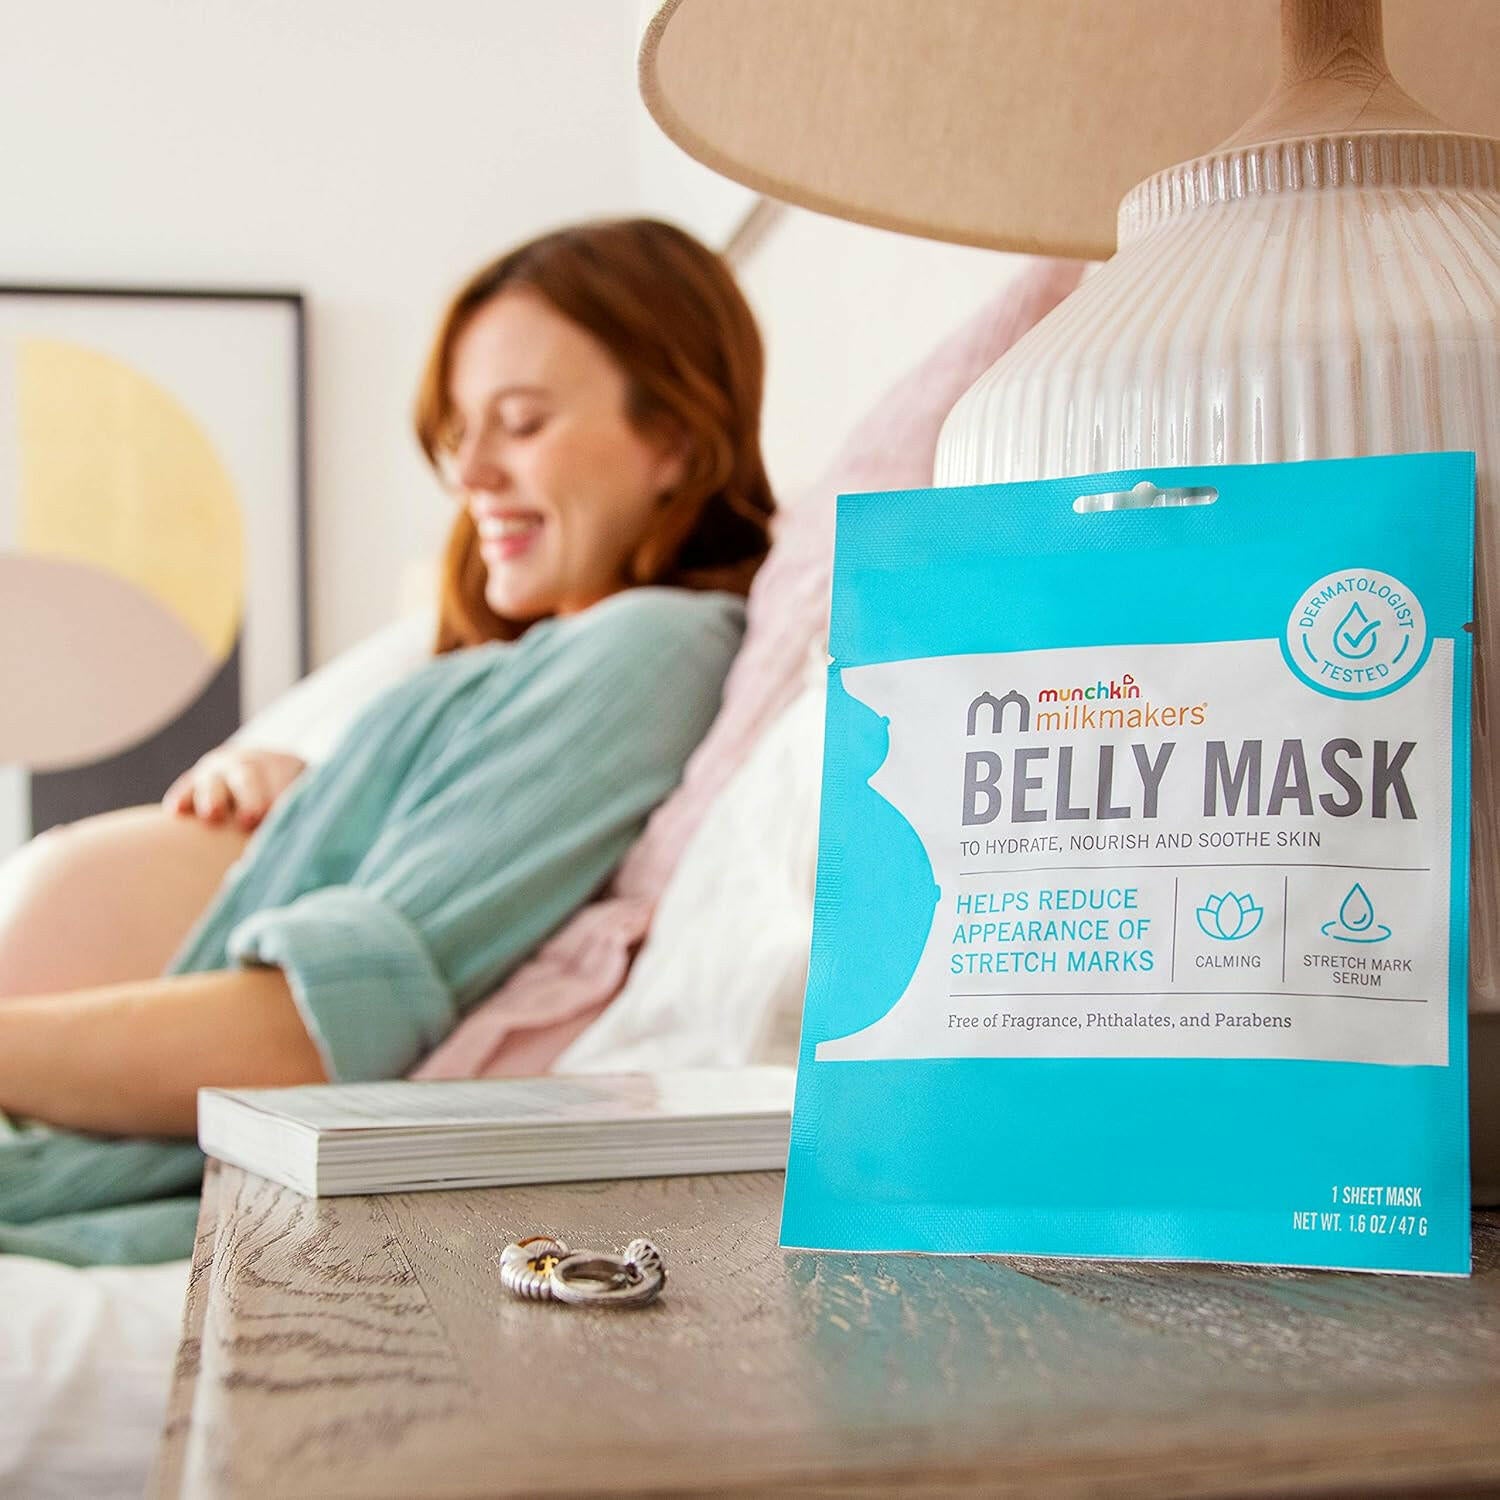 Munchkin Milkmakers Belly Mask for Pregnancy Skin Care & Stretch Marks, 1 Sheet Mask, 1 Count